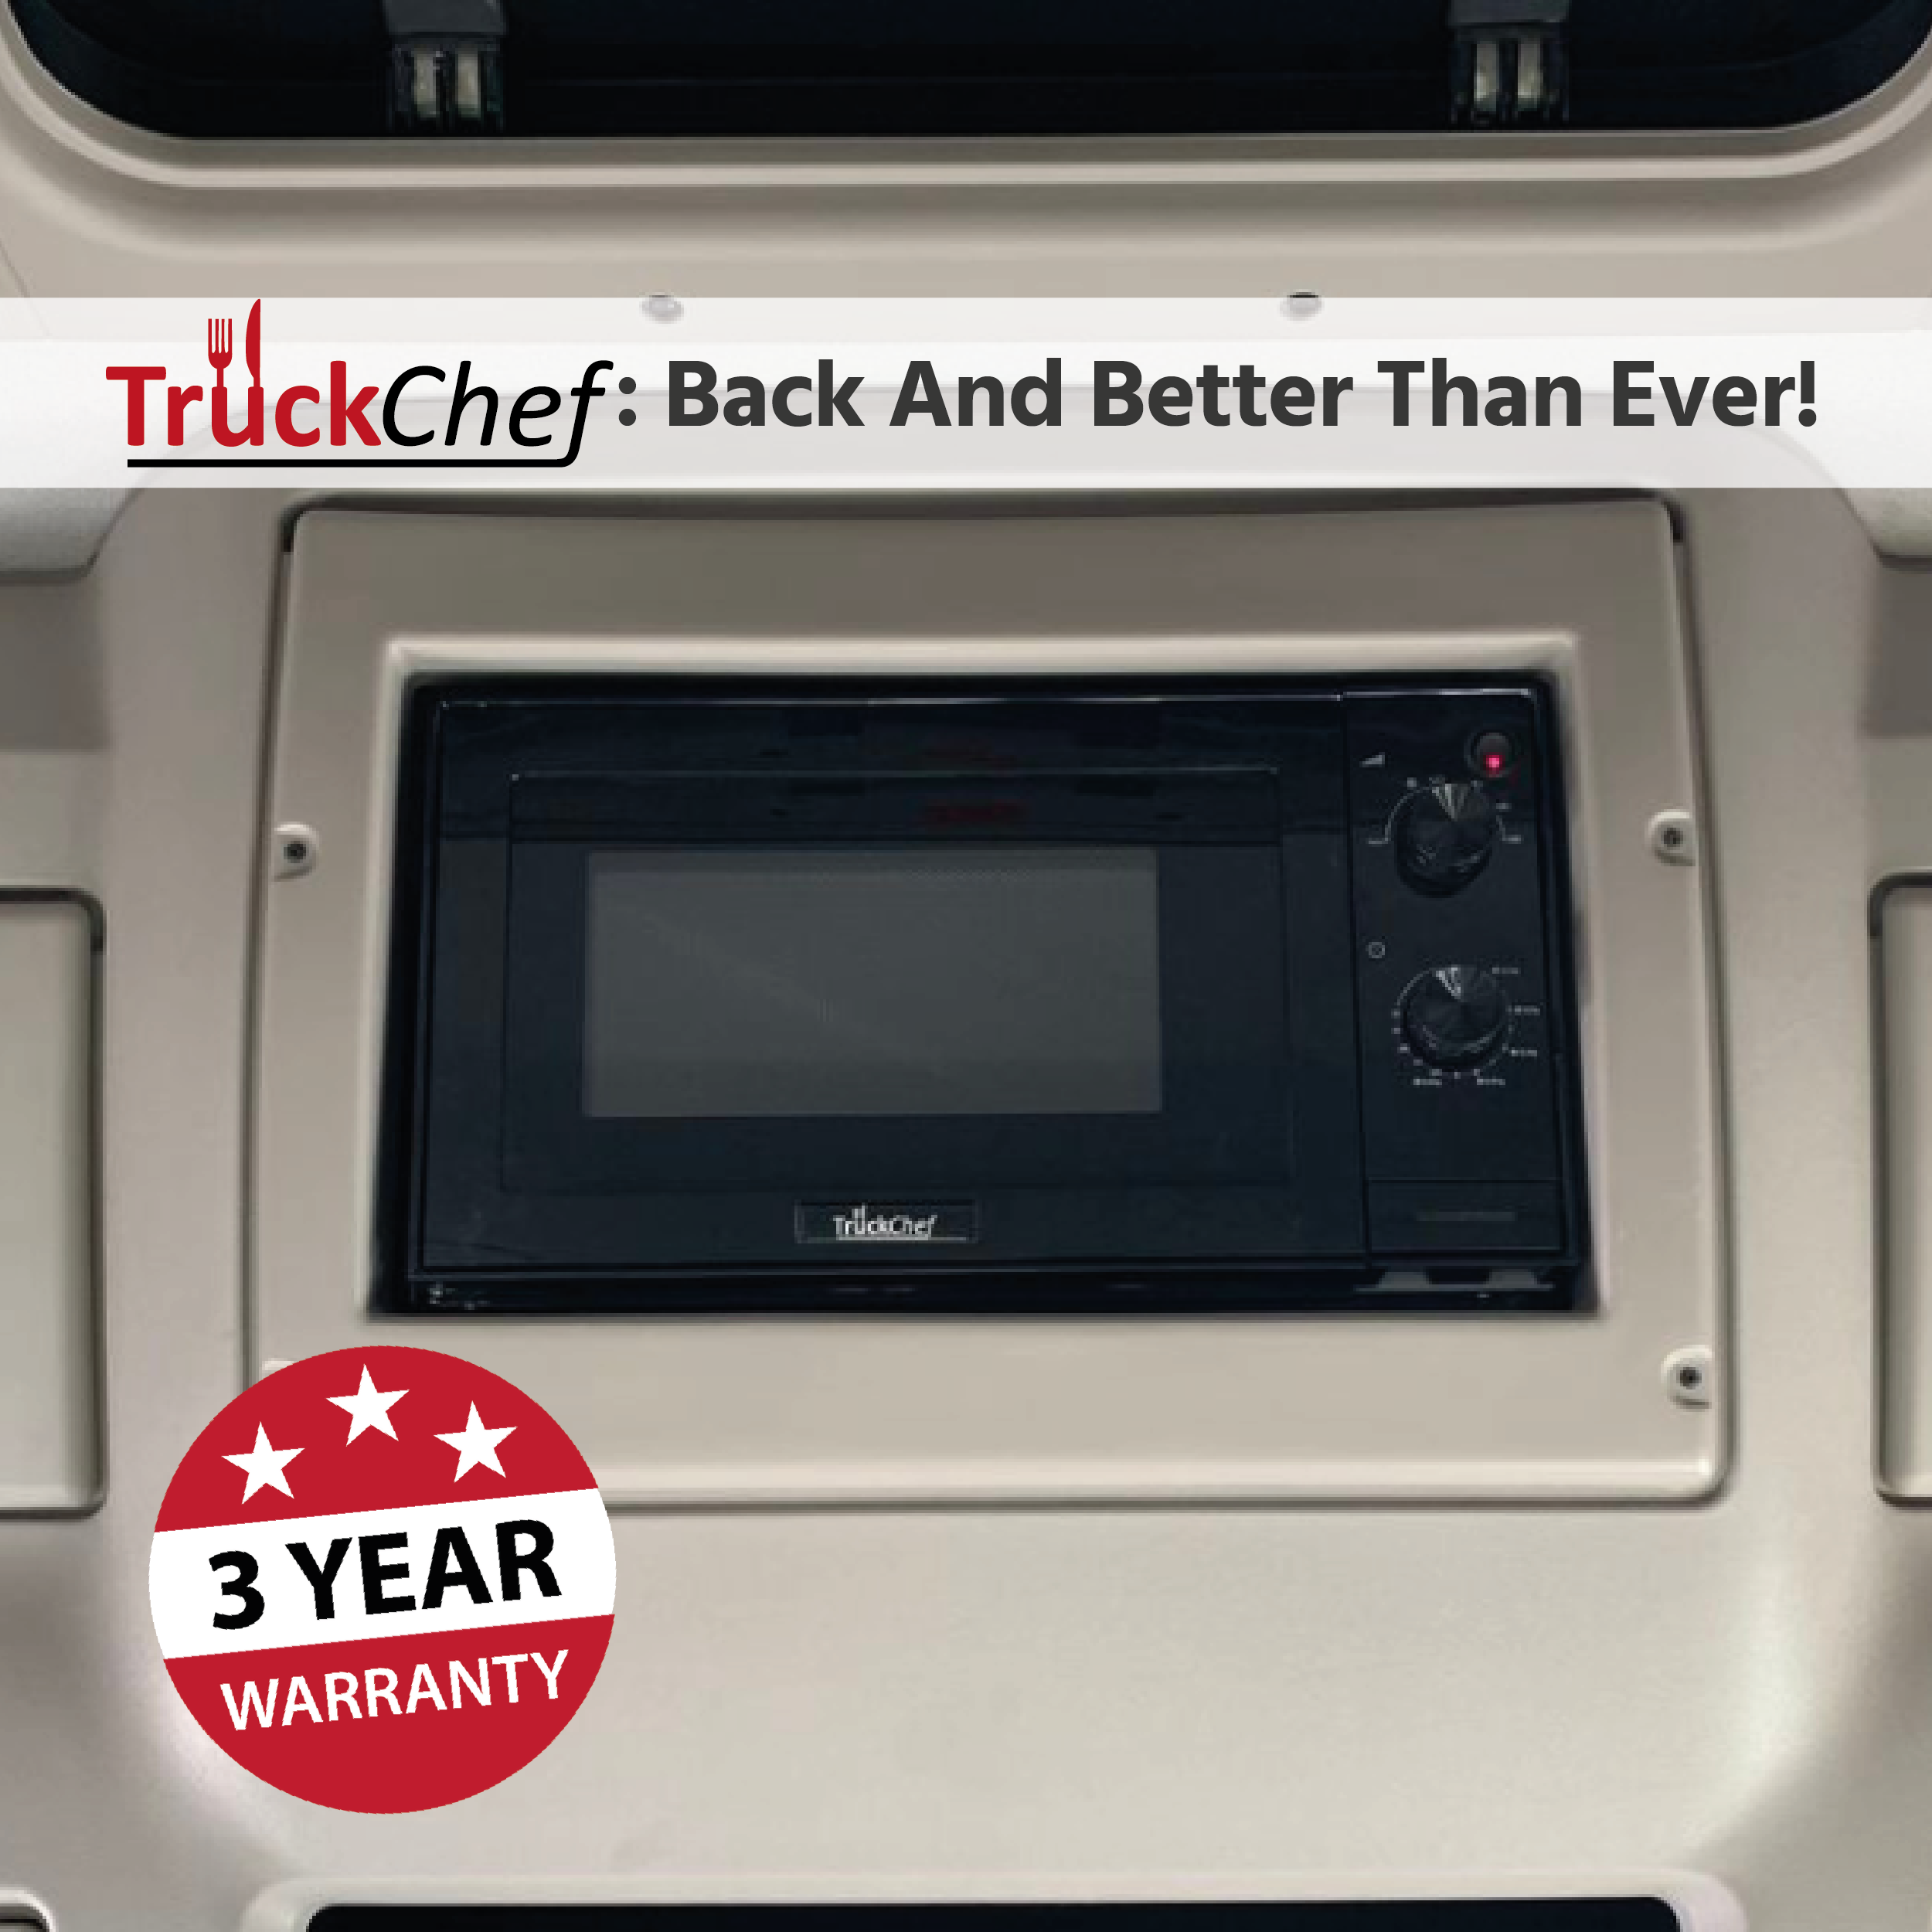 TruckChef: Back And Better Than Ever!